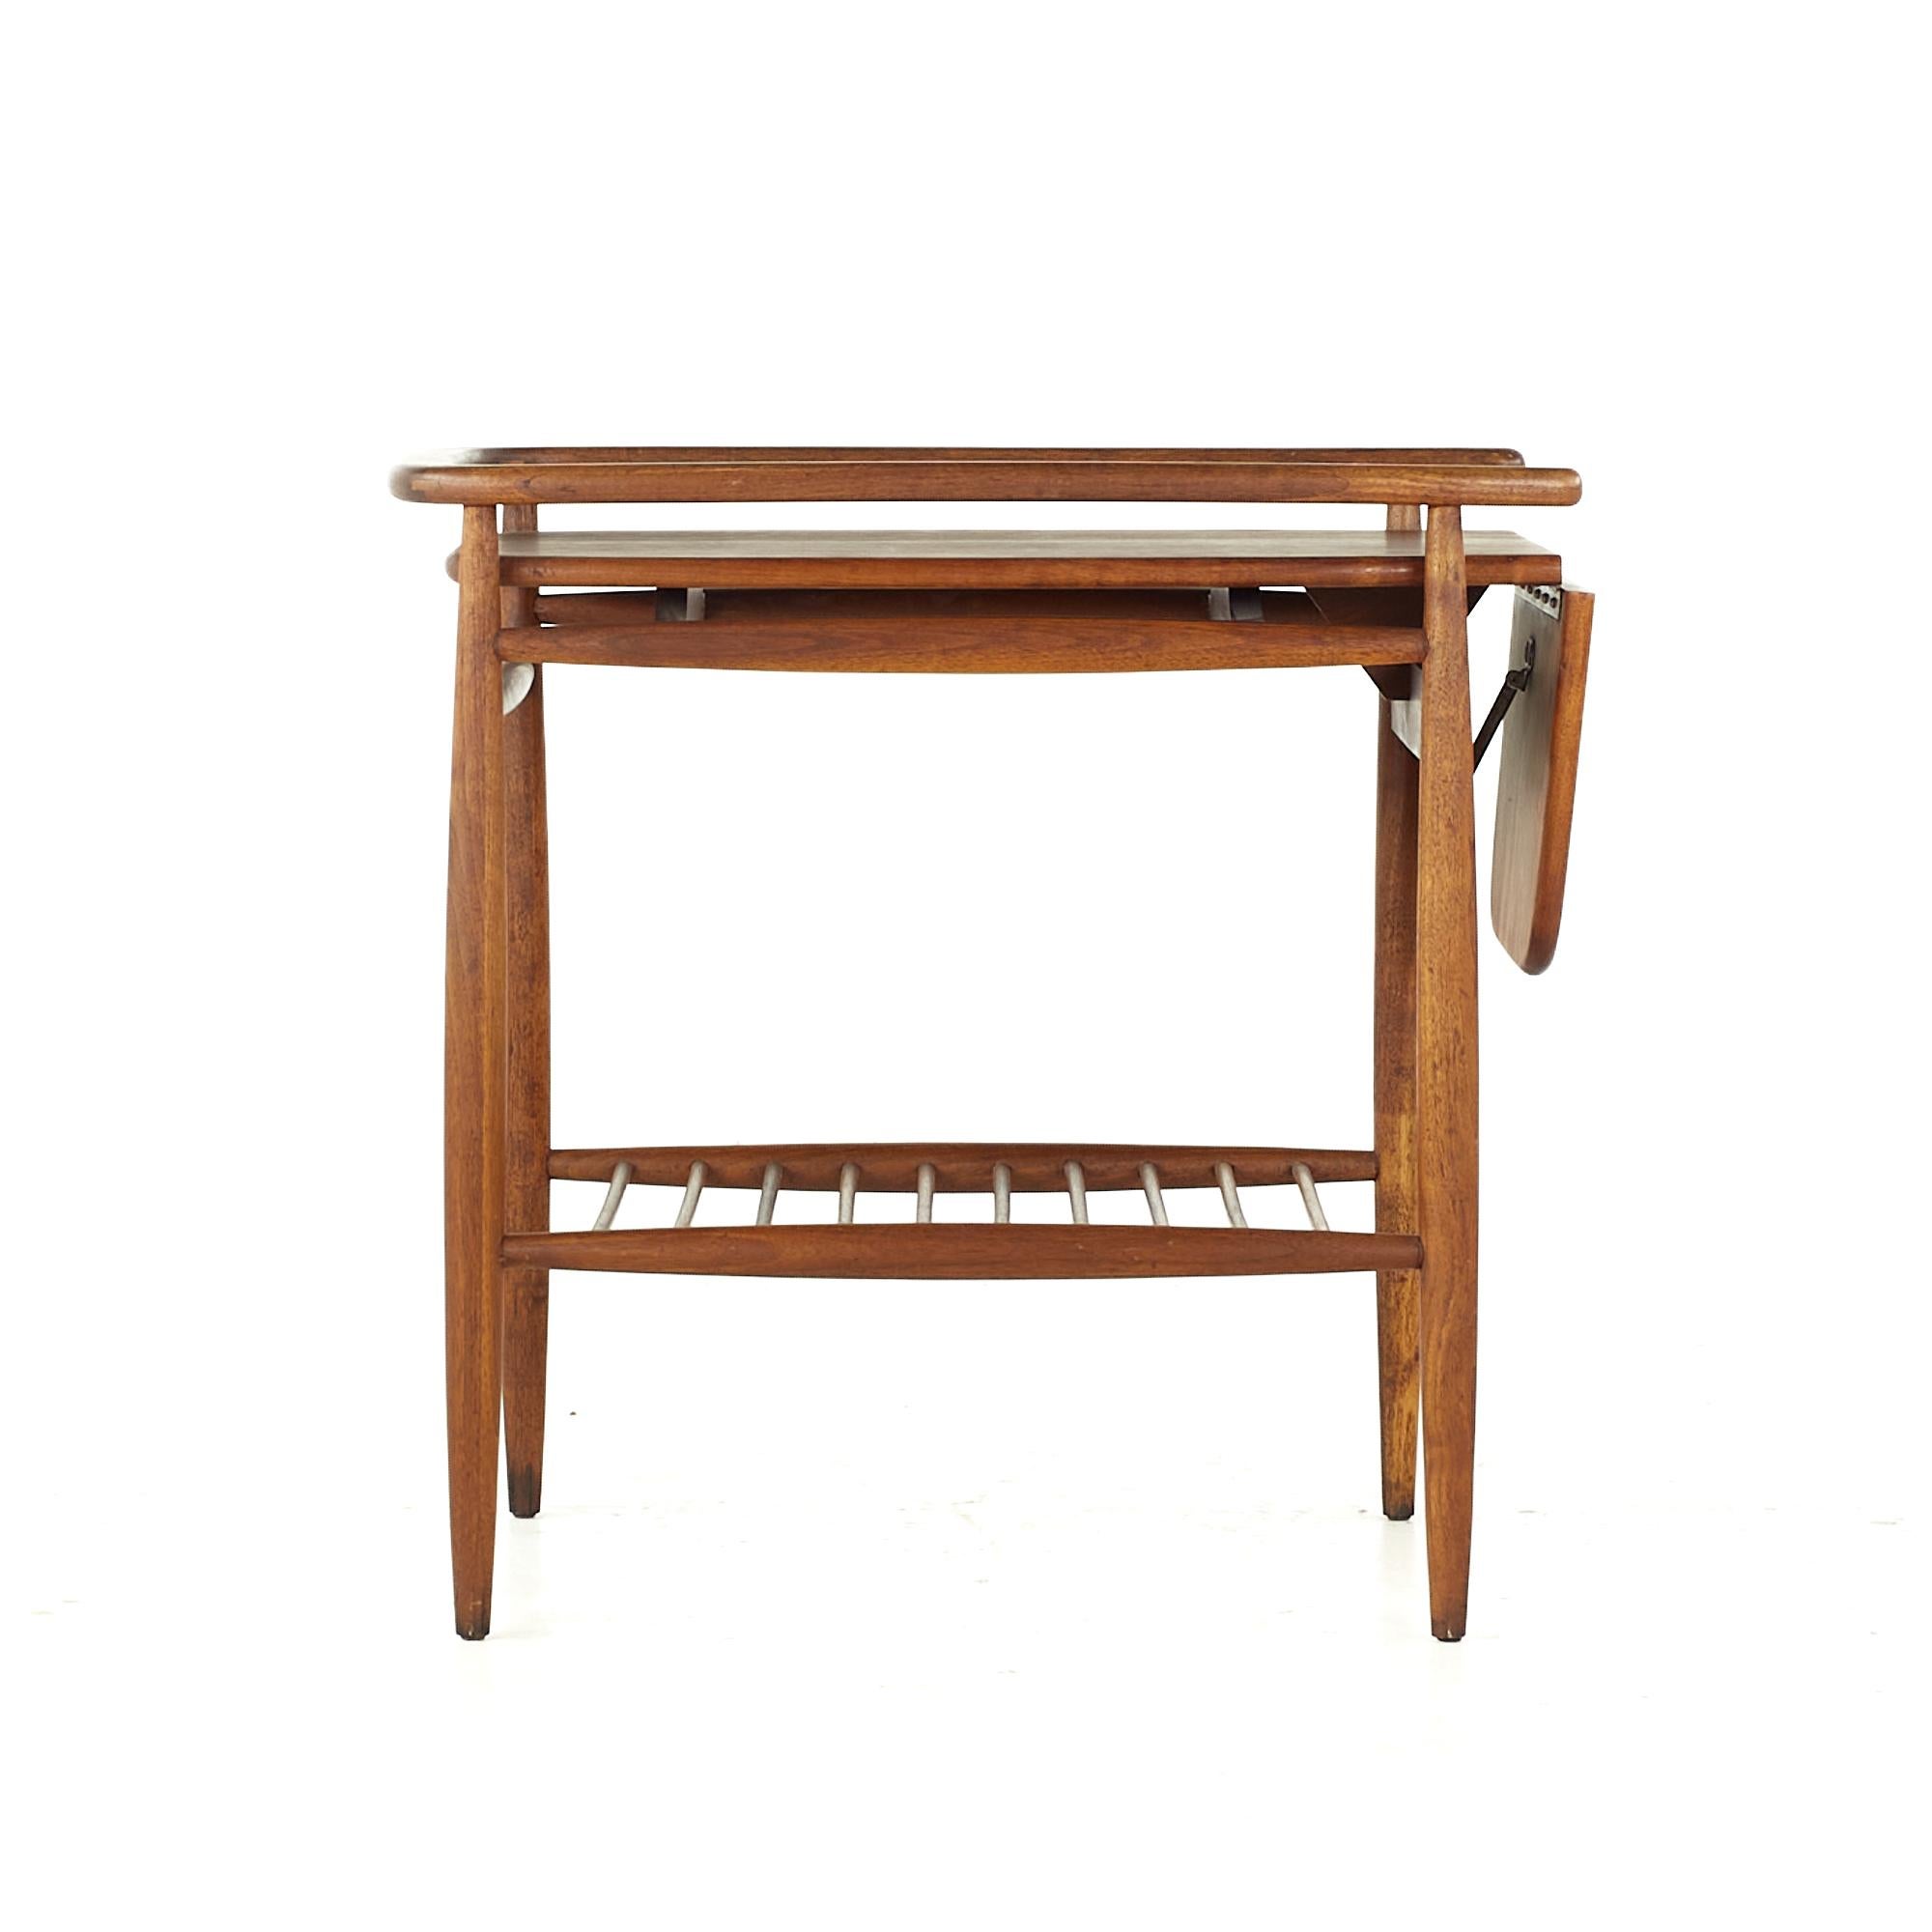 Arthur Umanoff midcentury Walnut Bar Cart

This bar cart measures: 20.75 wide x 30 deep x 28.75 inches high
Extended the depth measures 38.75 inches

All pieces of furniture can be had in what we call restored vintage condition. That means the